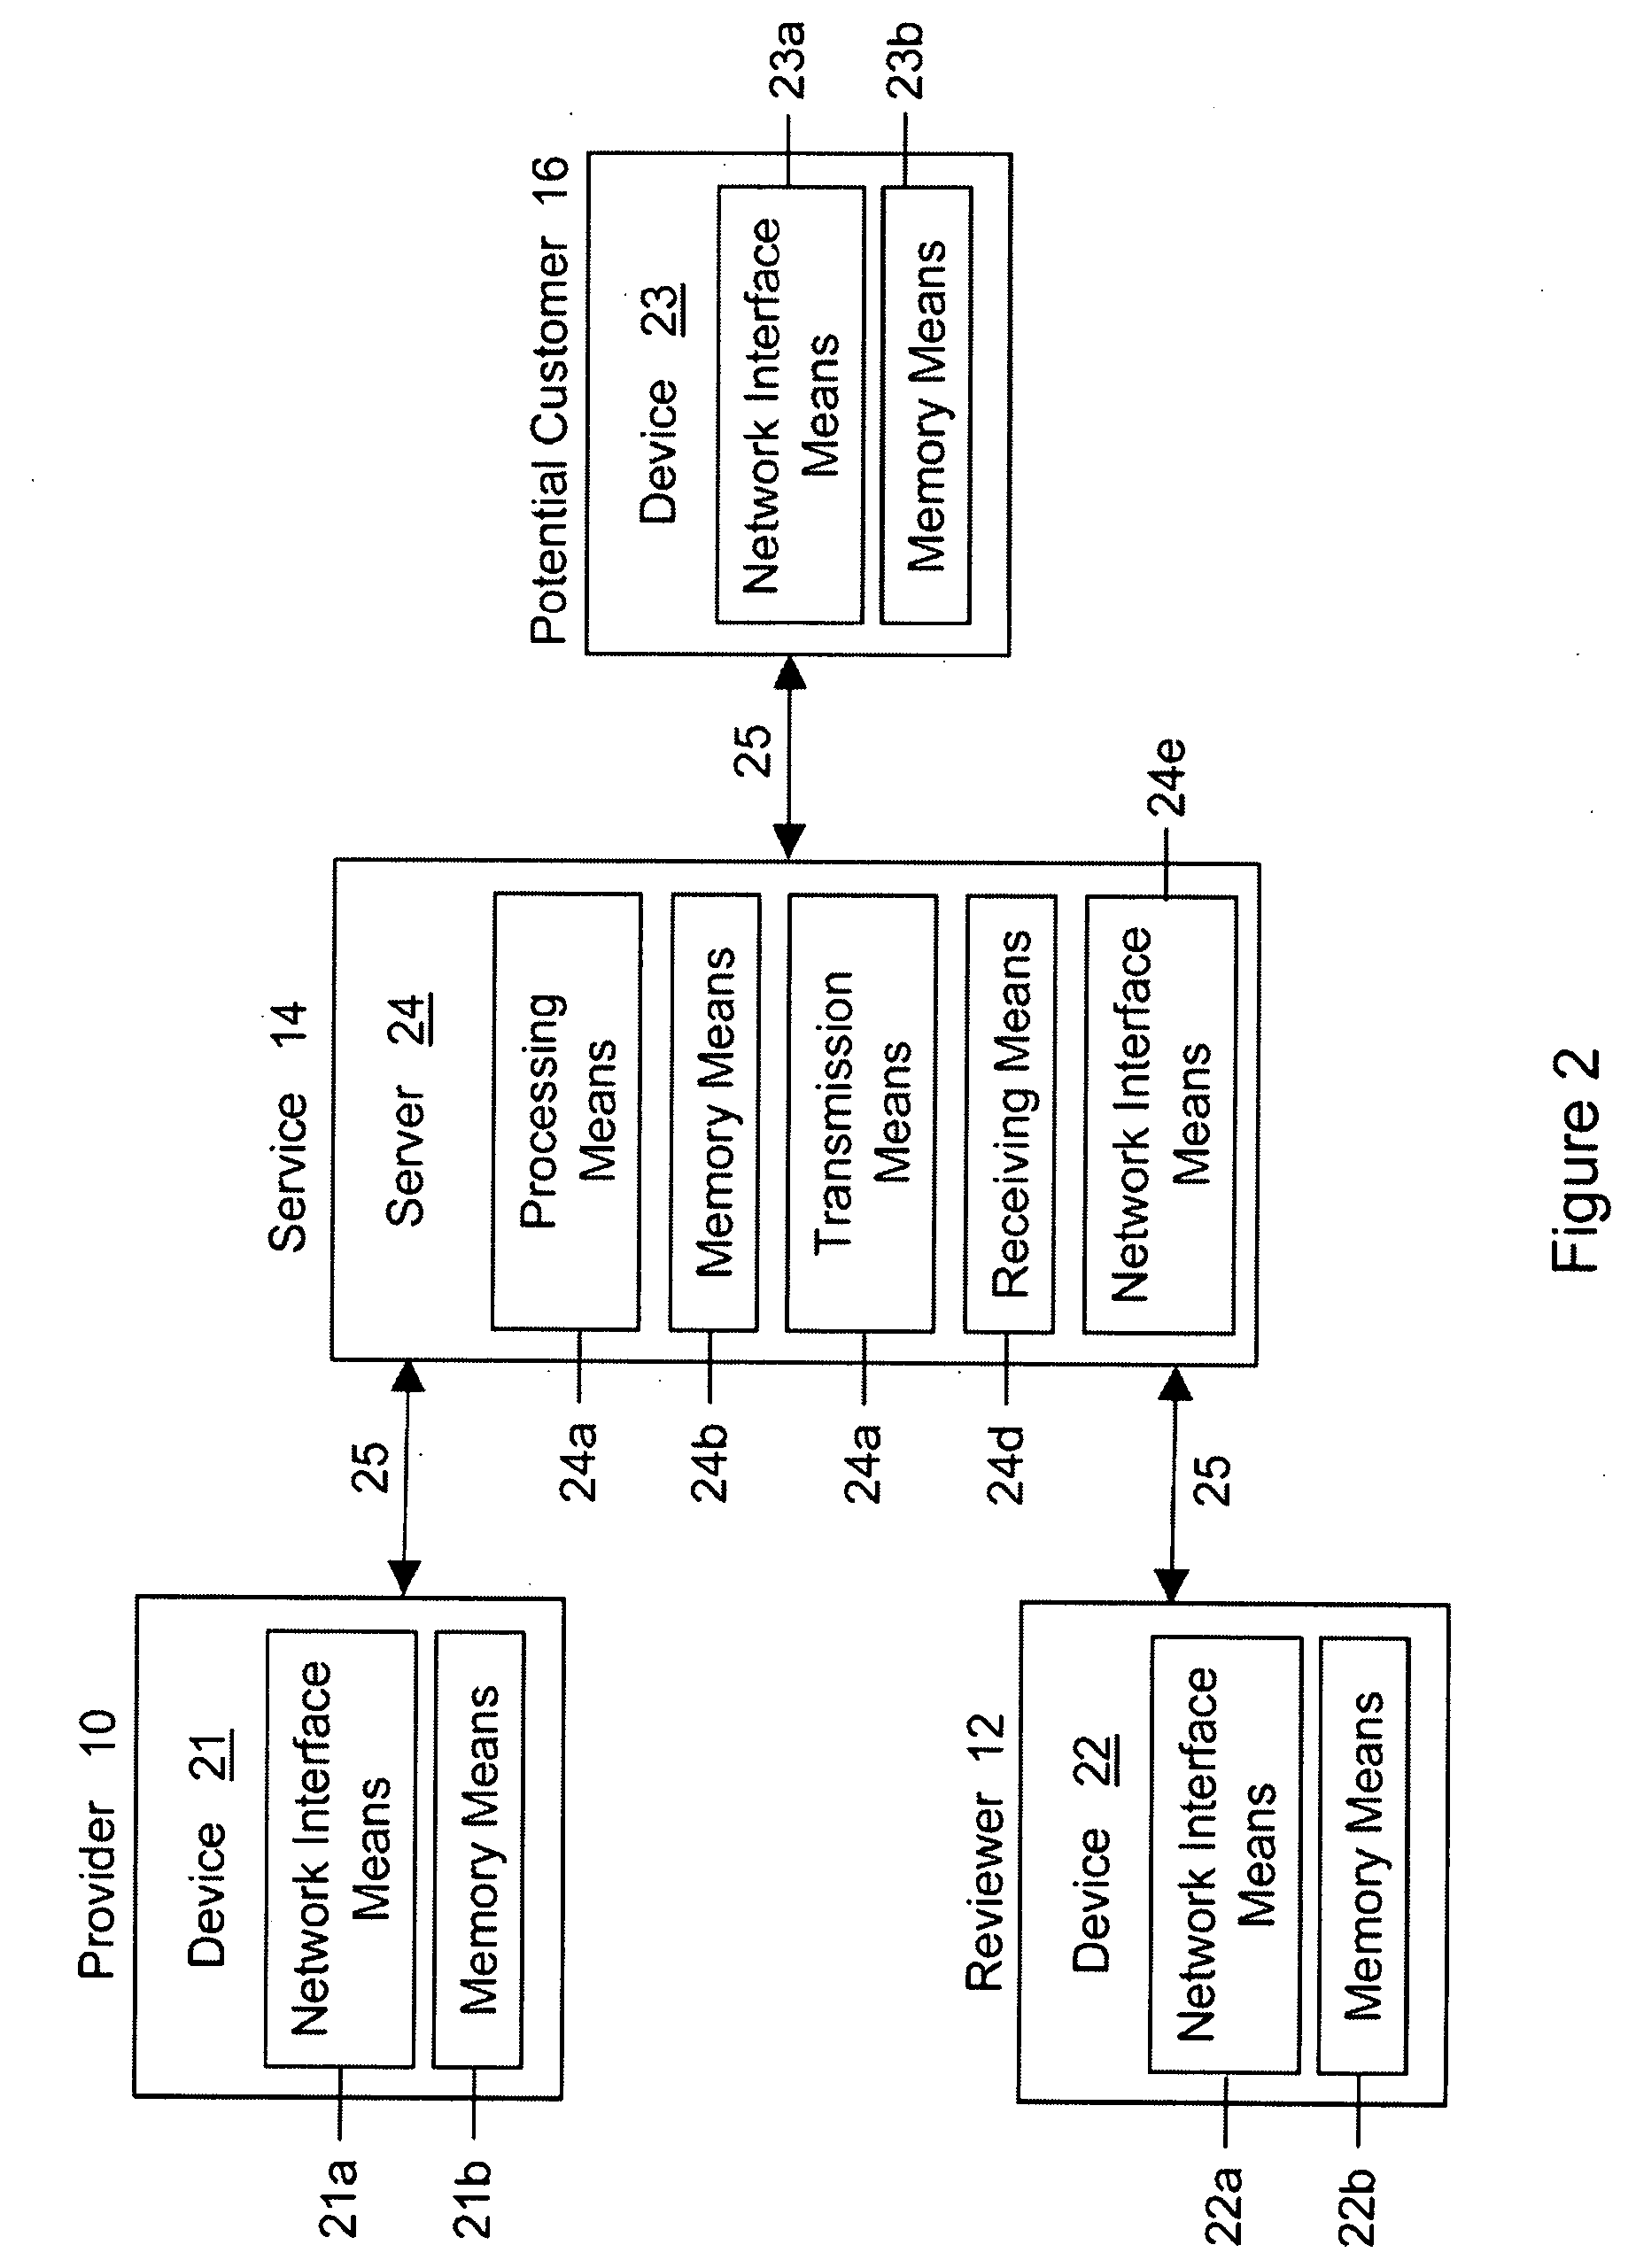 Adult care information system and method